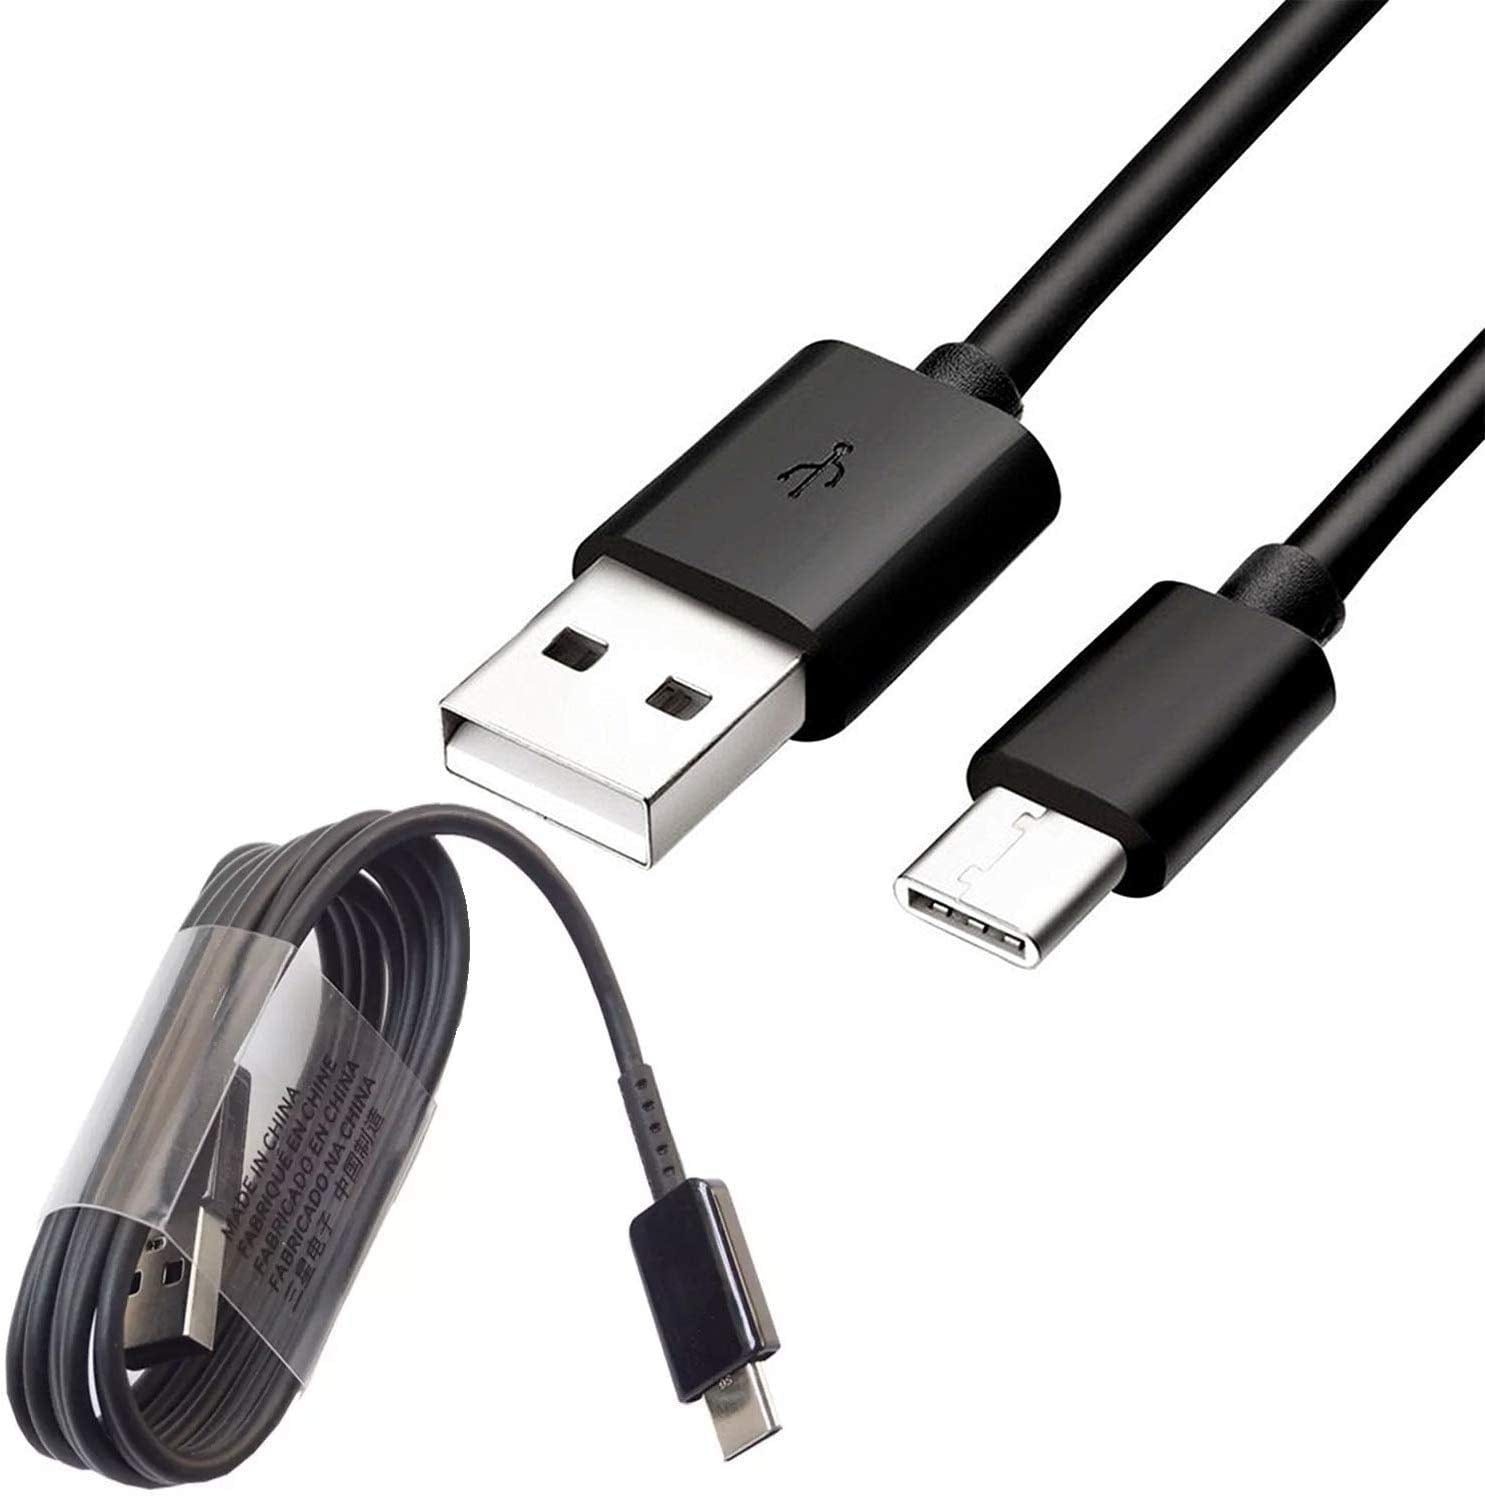 Samsung Galaxy A20e USB to Type C Charging Cable Lead Black - 1M - SmartPhoneGadgetUK